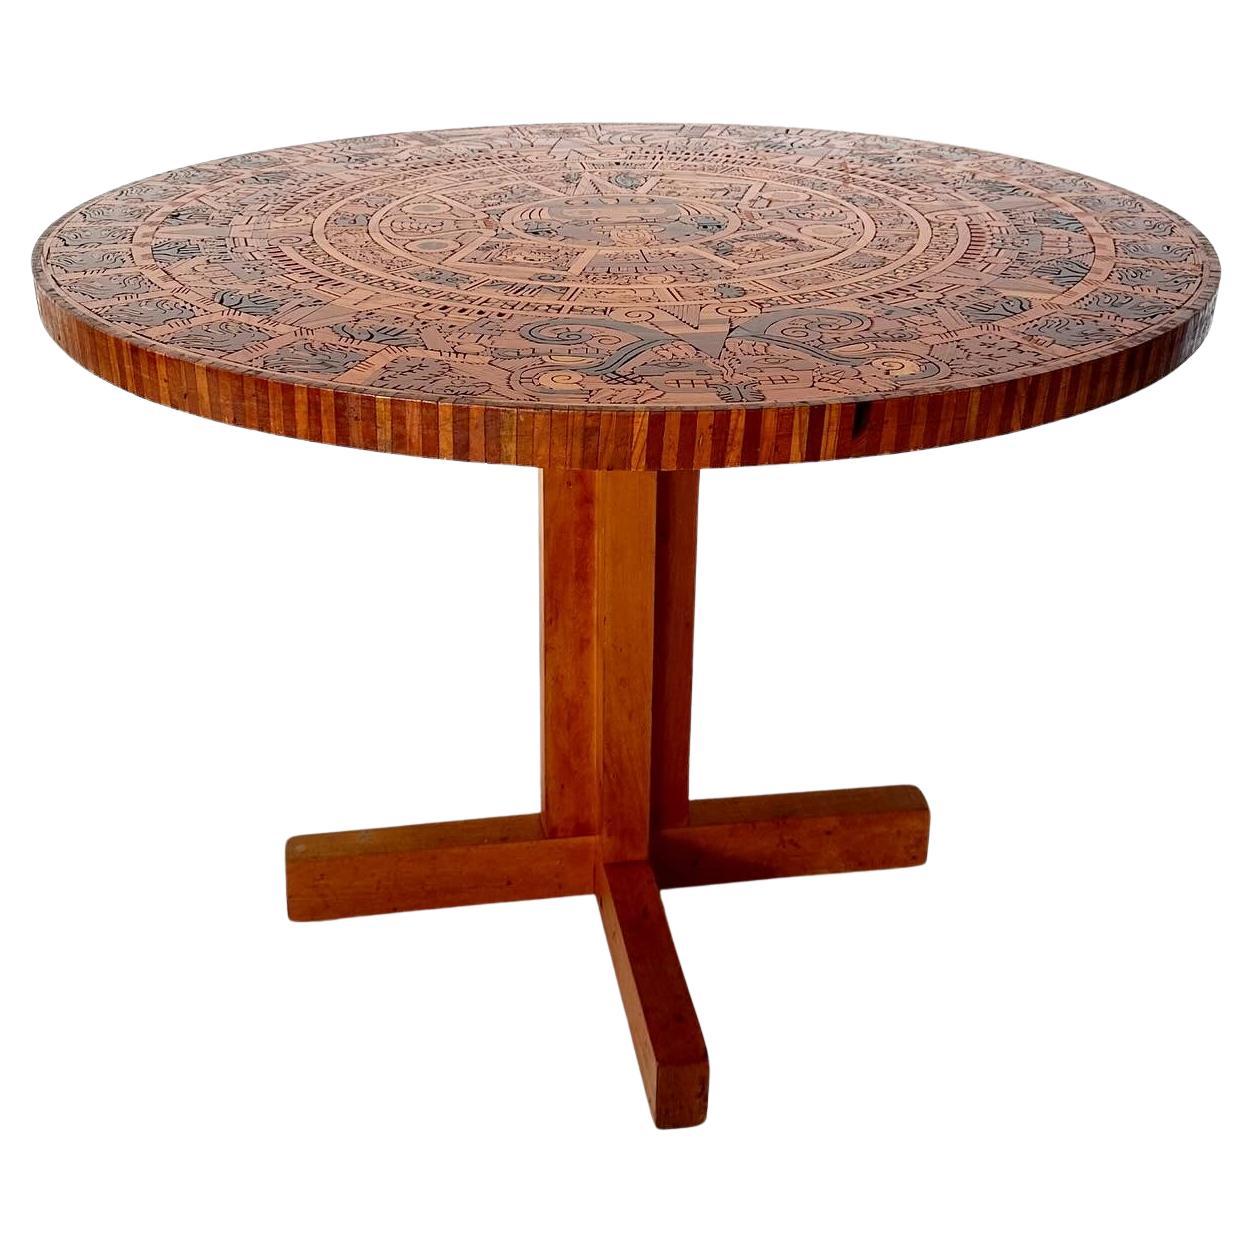 Handcrafted Wooden Inlay Aztec Calendar Dining Table